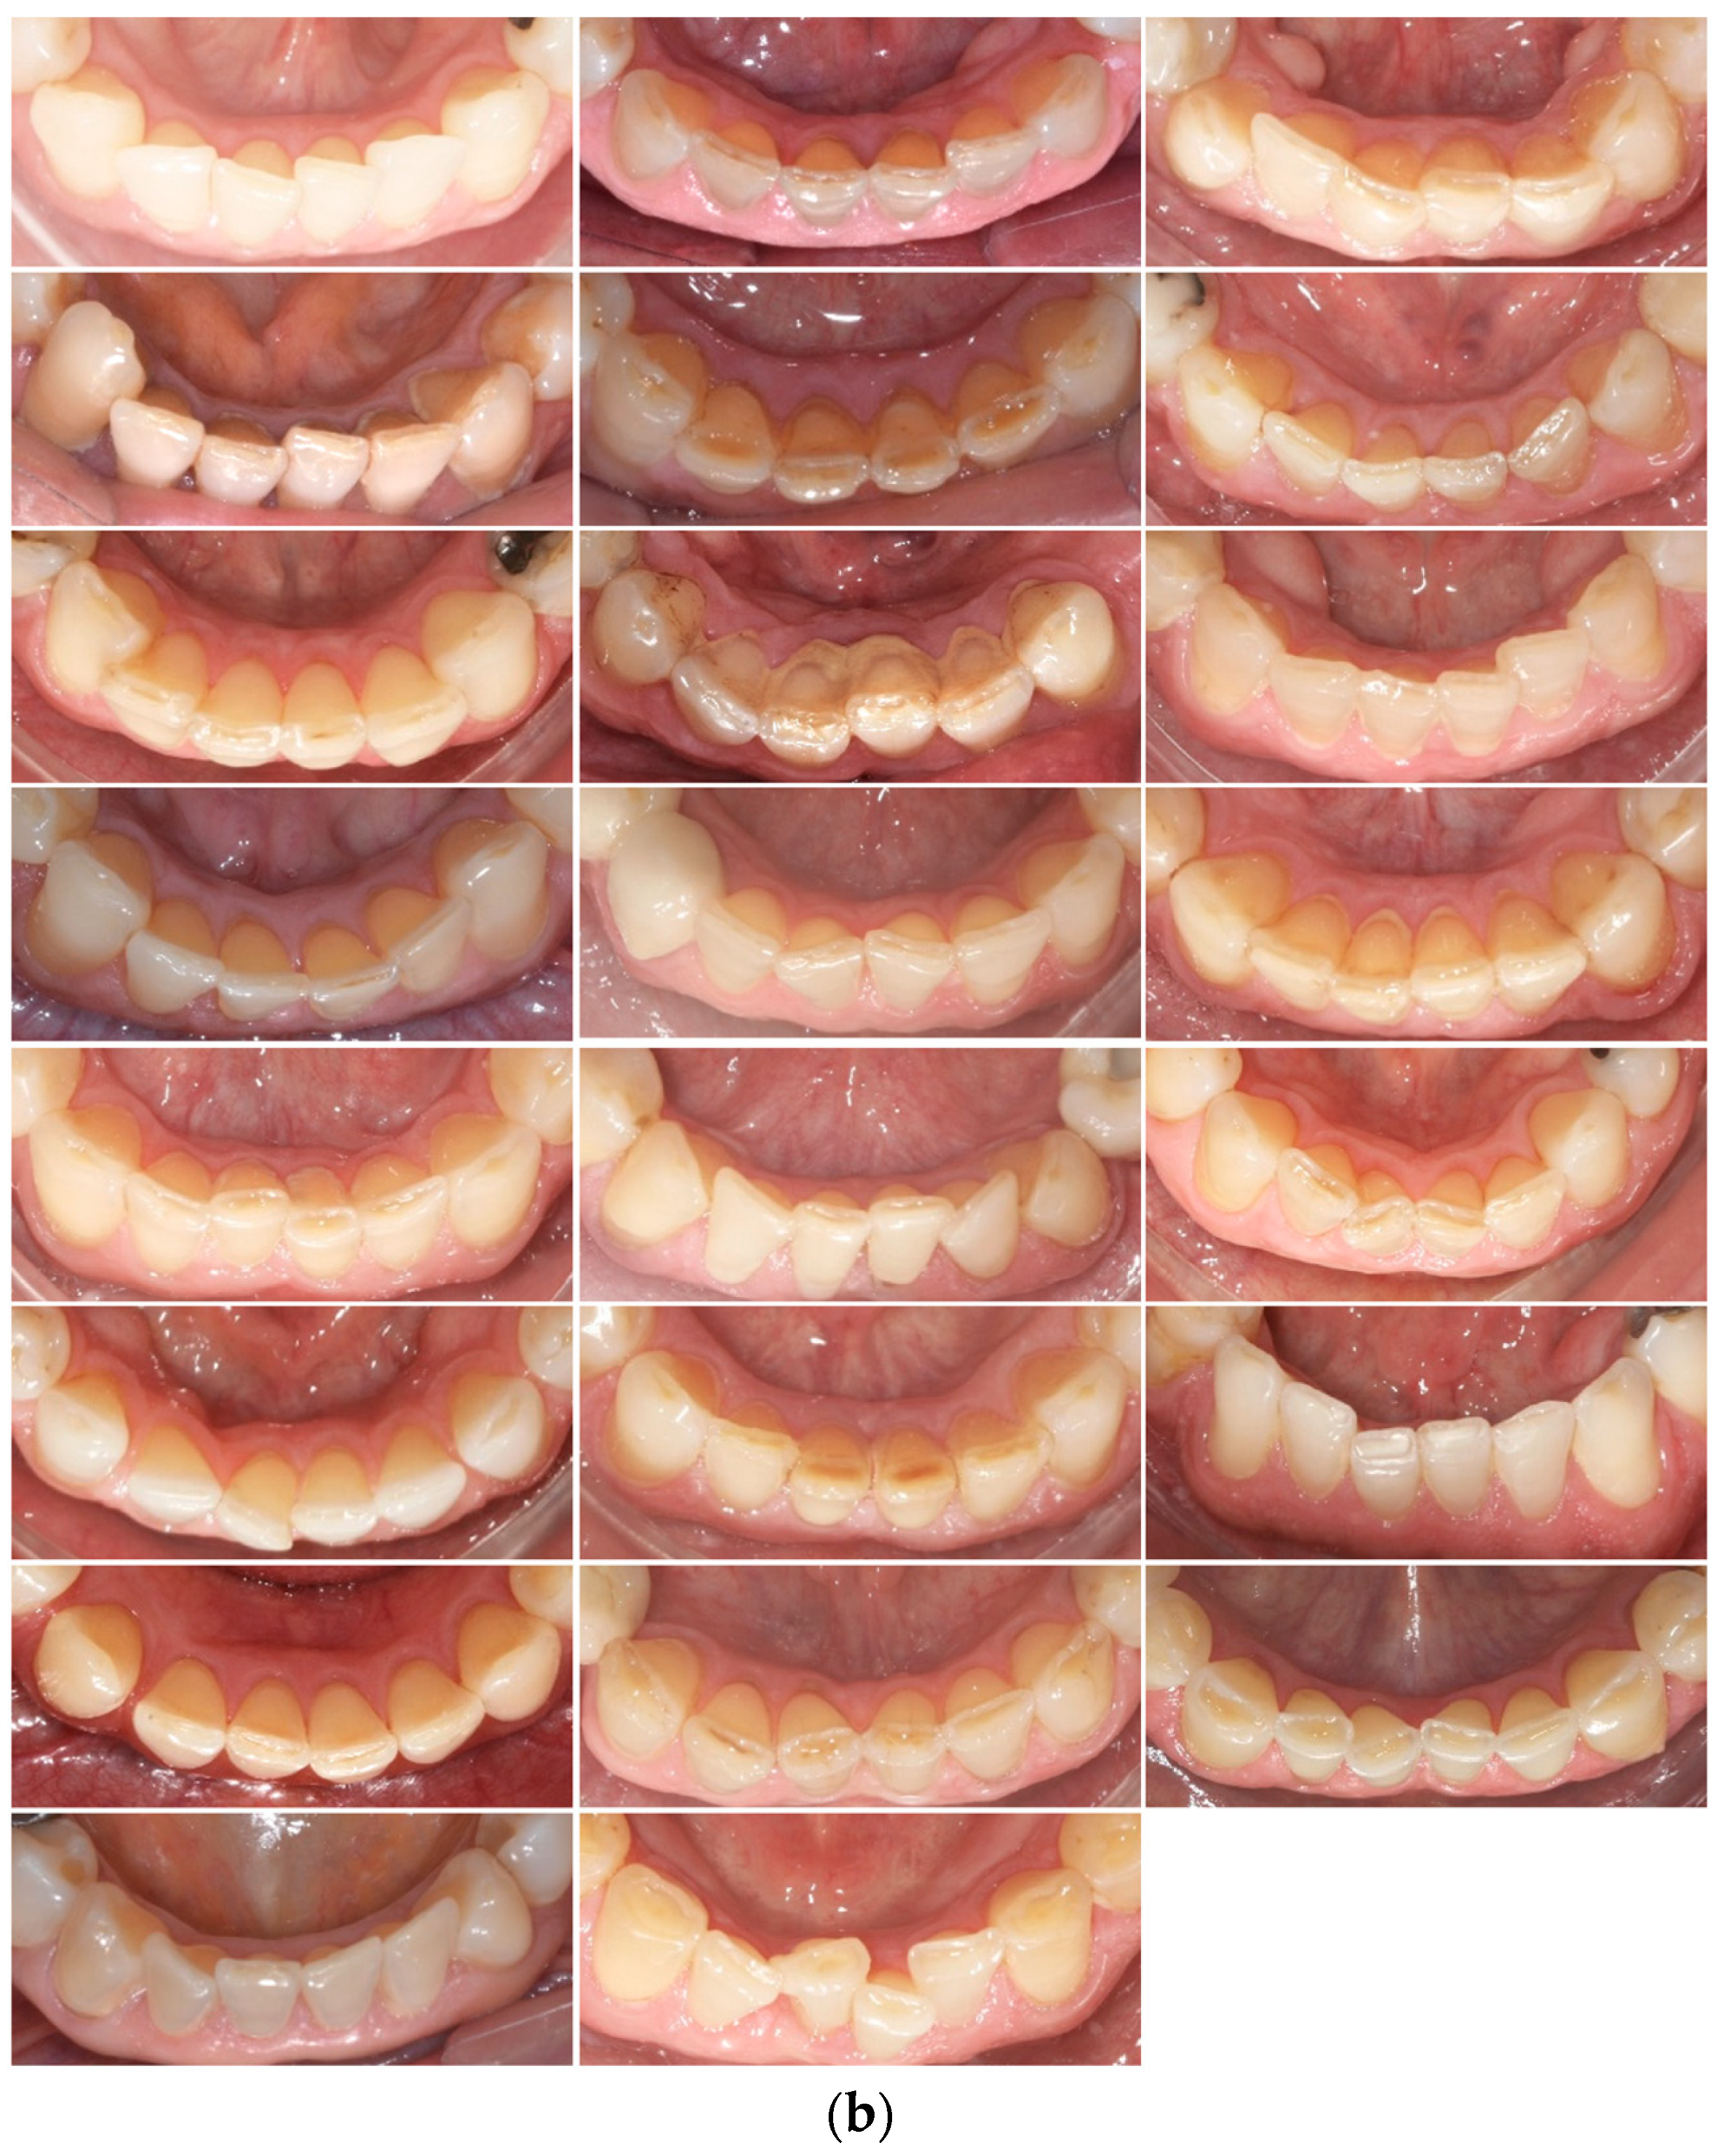 JCM | Free with Study Normal Subjects up Pioneering | to in A Occlusion: of the Full-Text Longitudinal Wear Age Tooth 60 Erosive